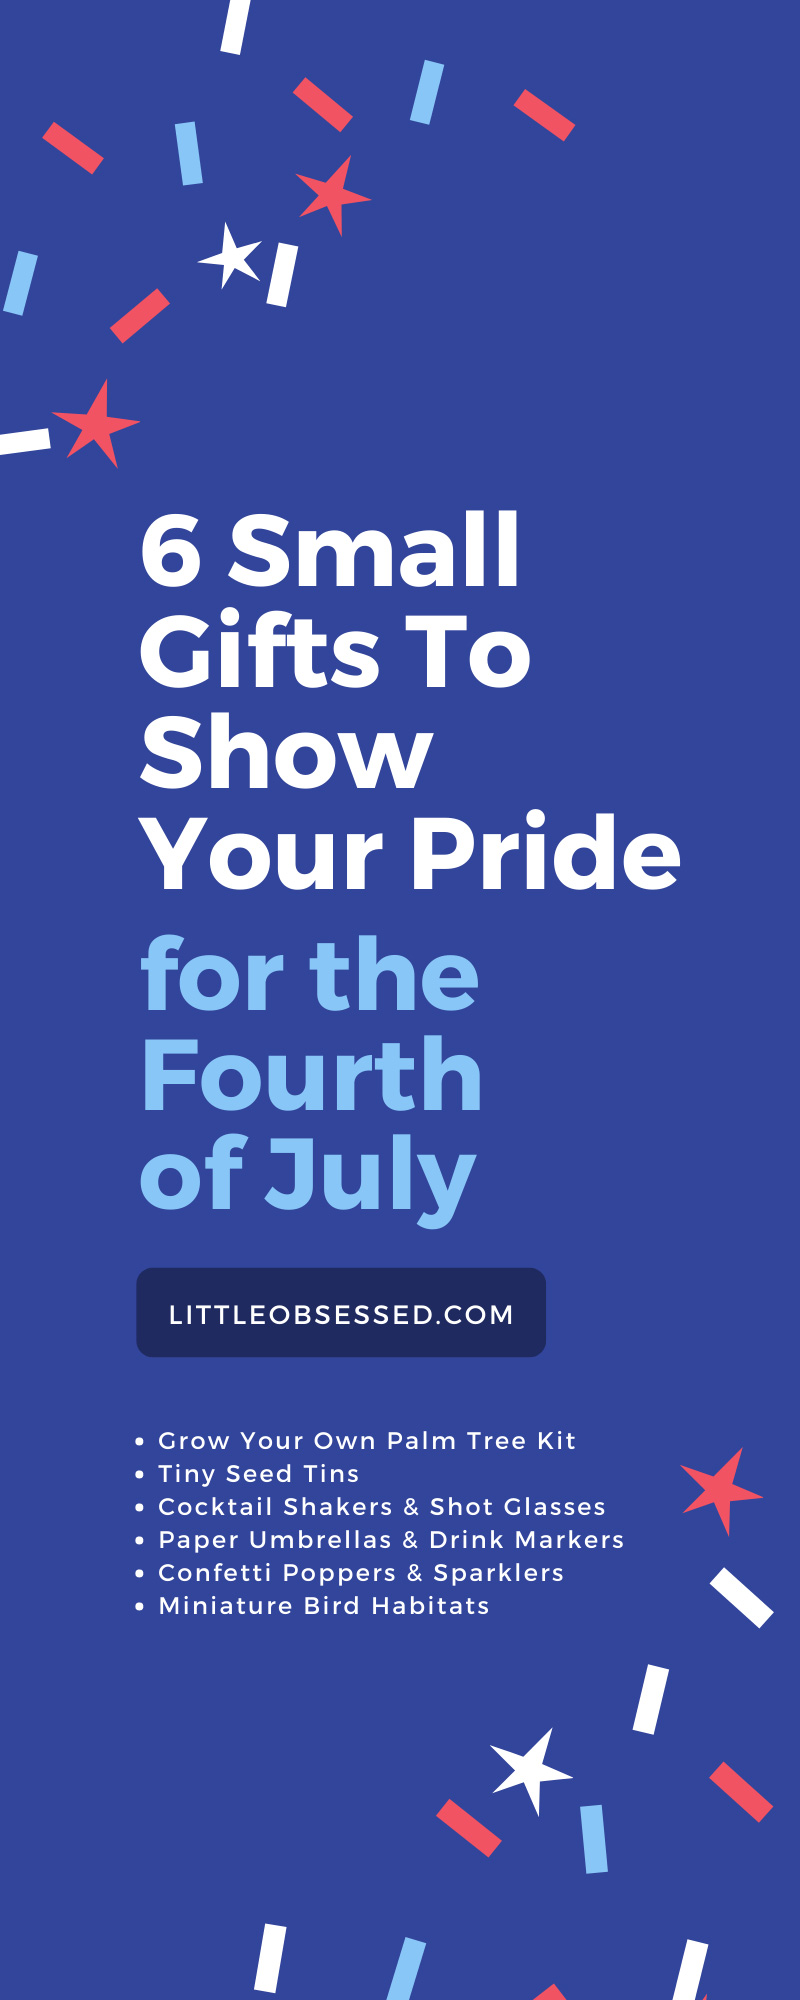 6 Small Gifts To Show Your Pride for the Fourth of July